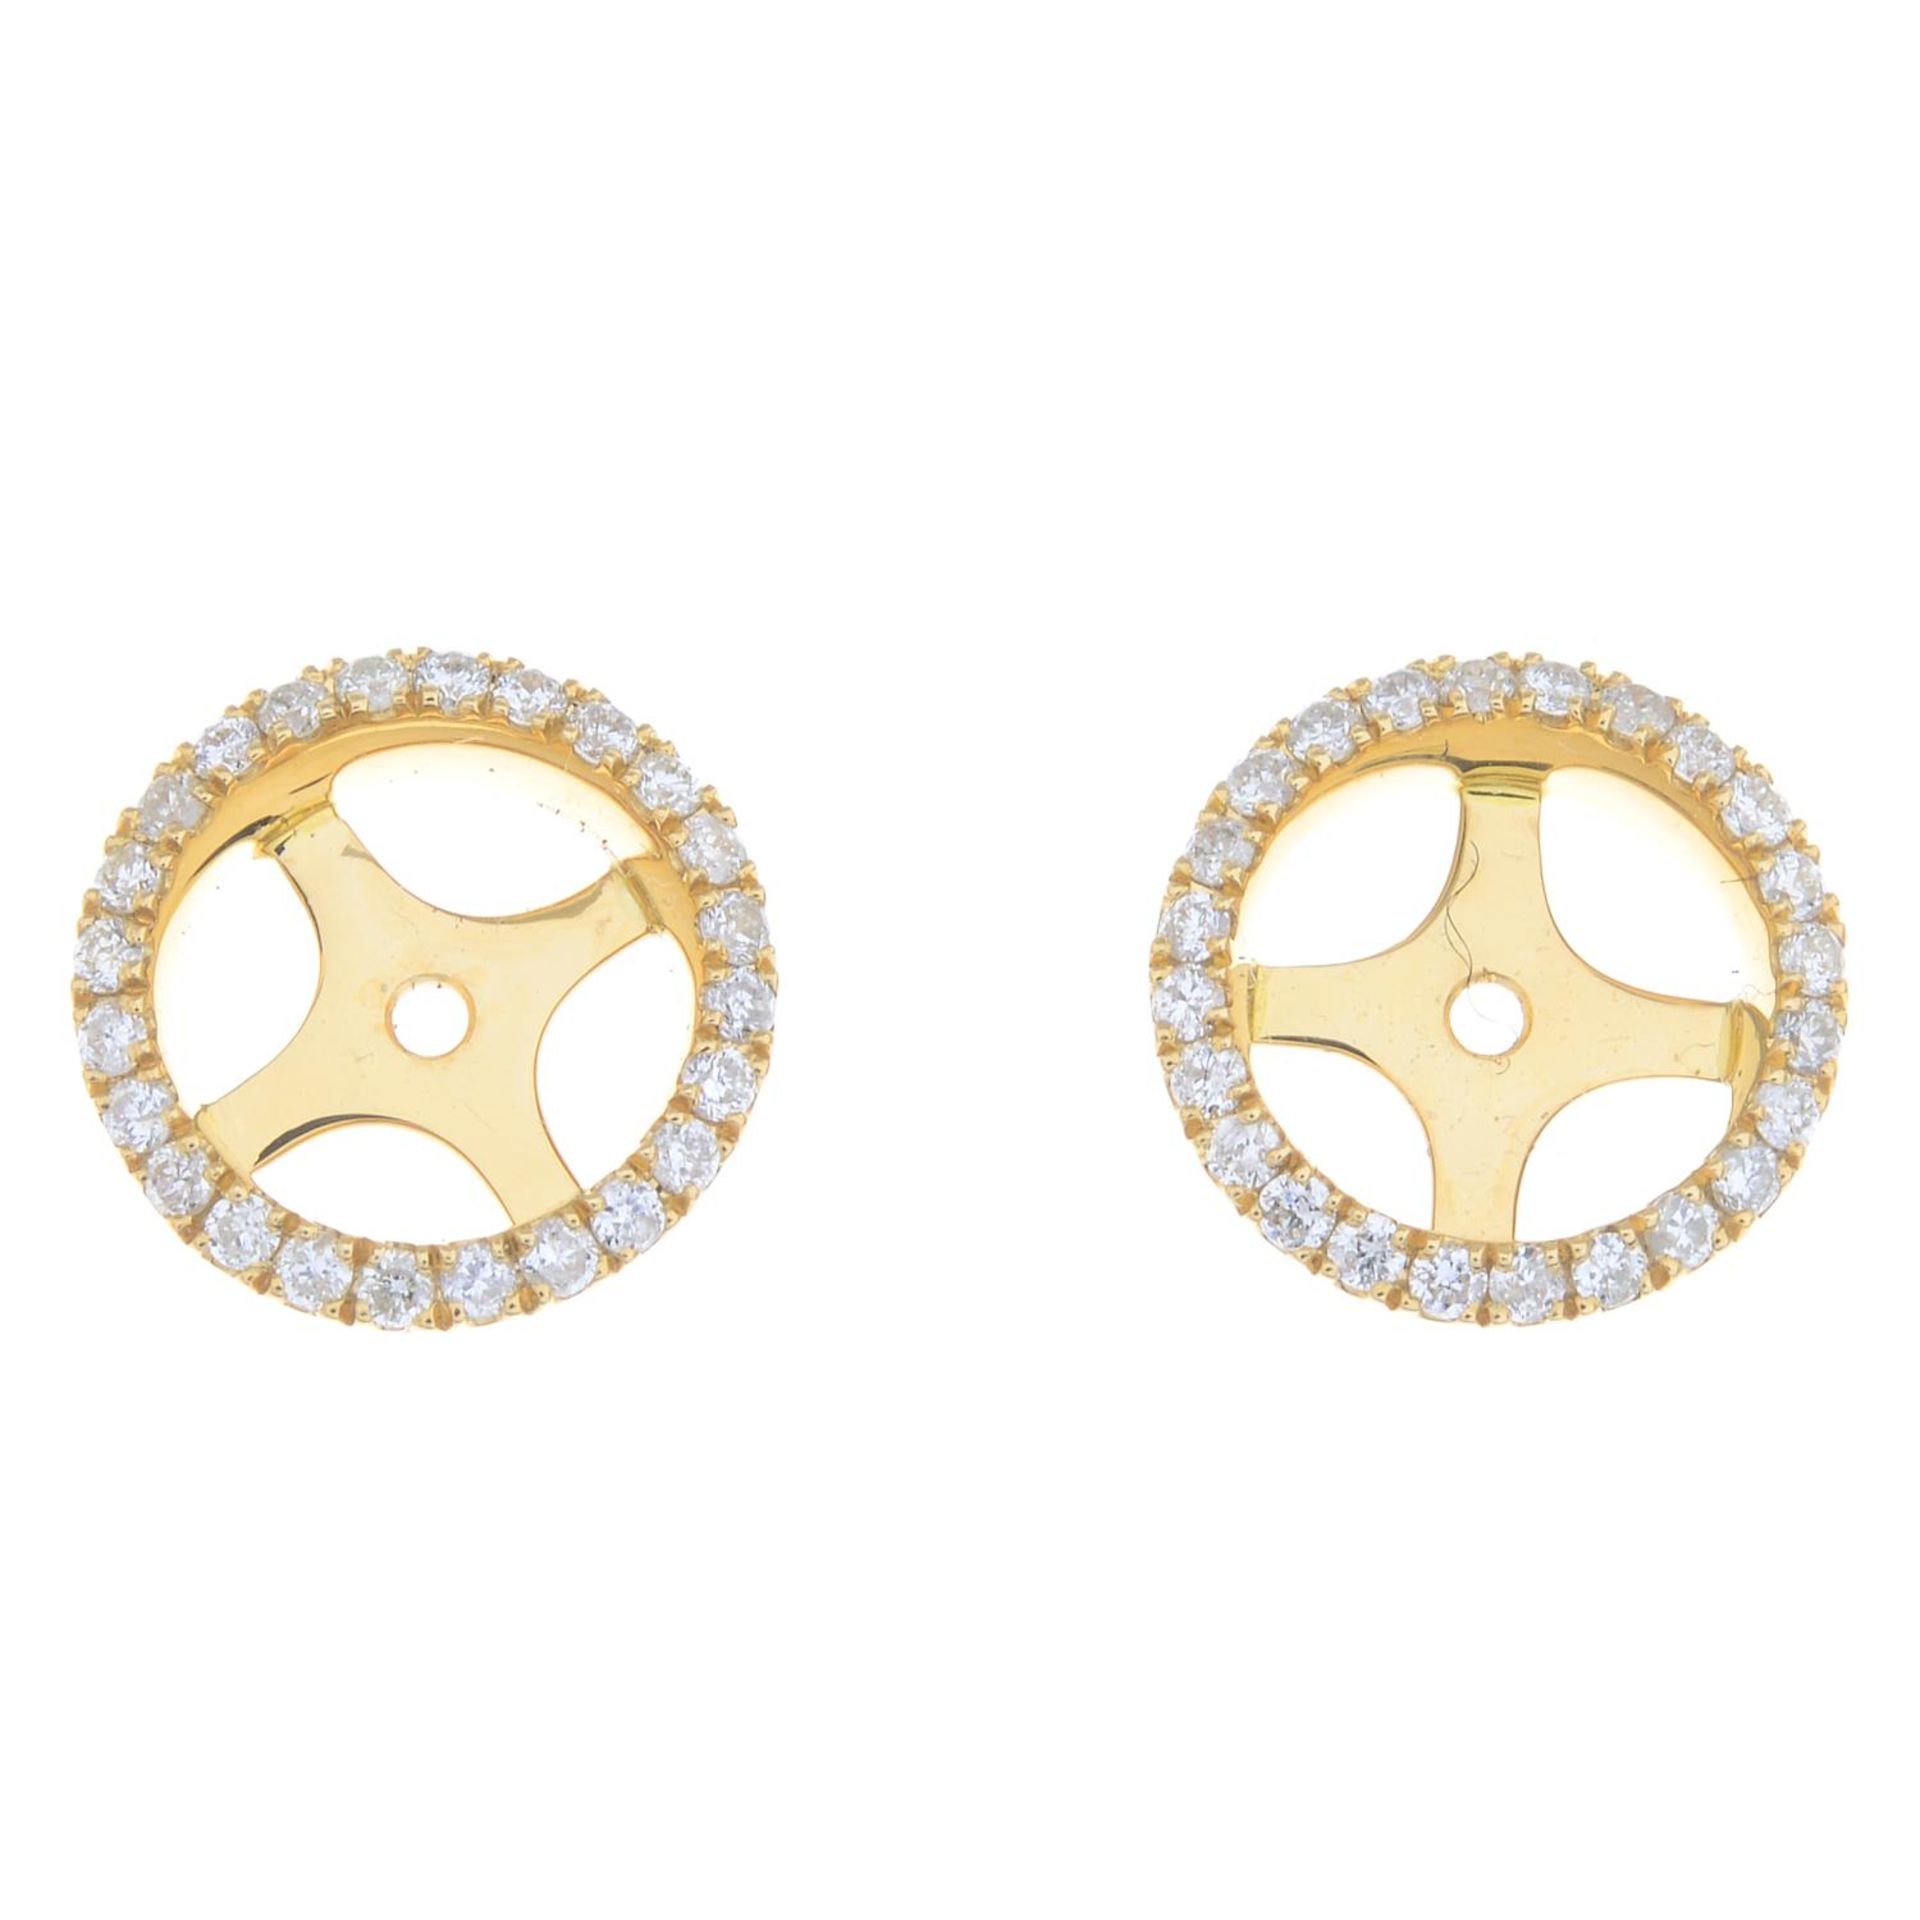 A pair of 18ct gold diamond stud earring jackets.Estimated total diamond weight 0.40ct.